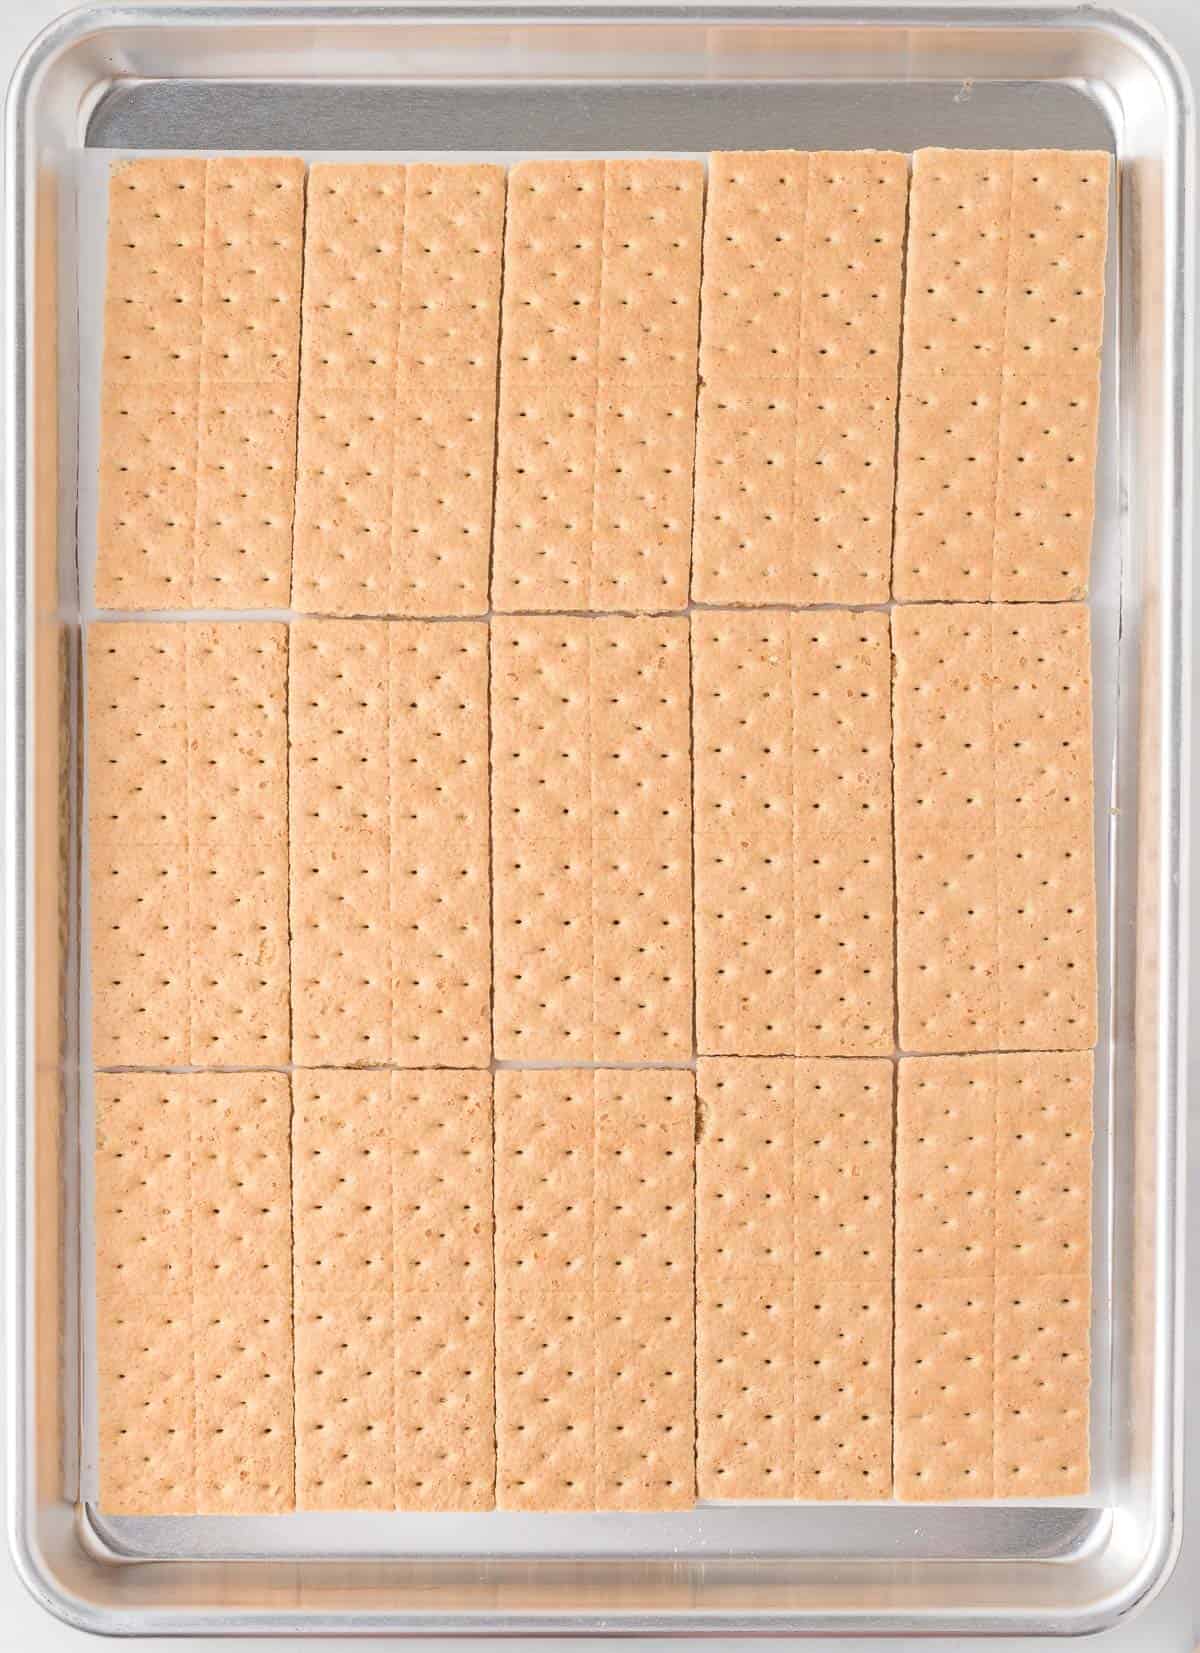 graham crackers lined up on a baking sheet